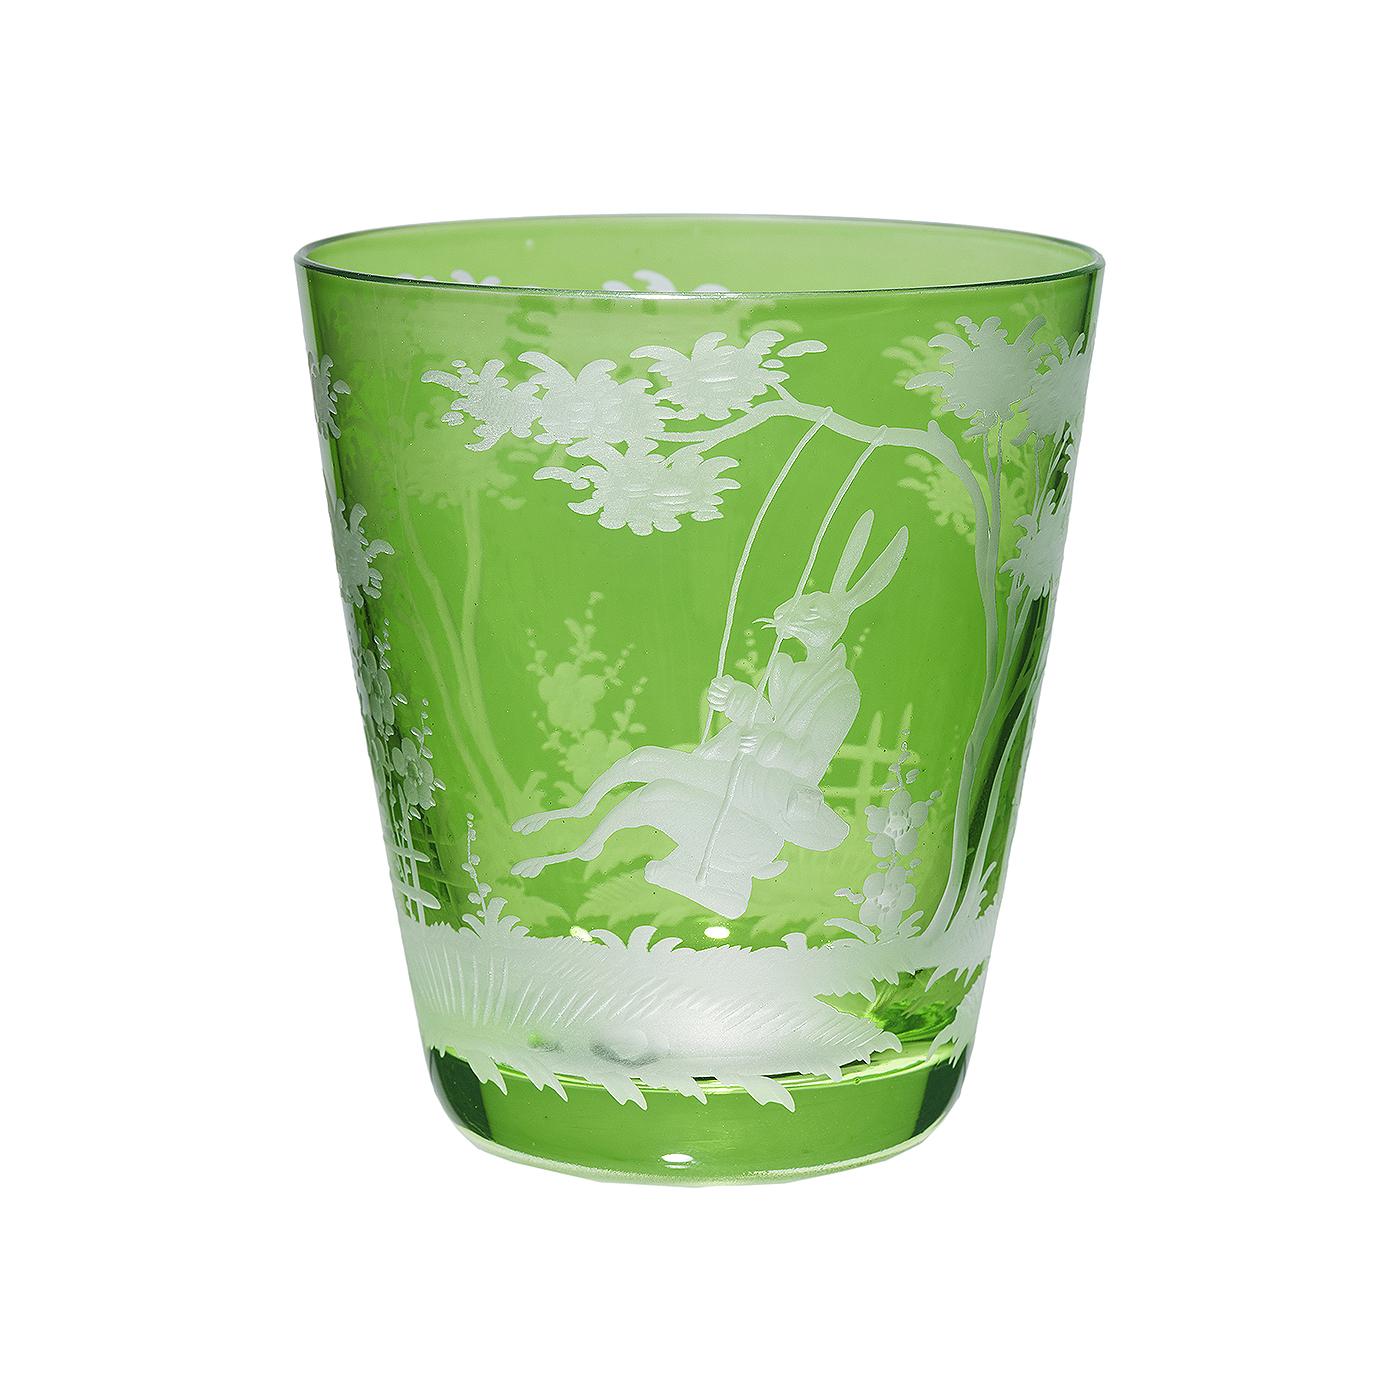 Hand blown tumbler in green crystal with a hand-edged Easter Country style decor all around. The decor shows a hand-engraved antique Easter decor with bunnies all-over the glass. Handmade in Bavaria/Germany. Can be ordered in different colors.